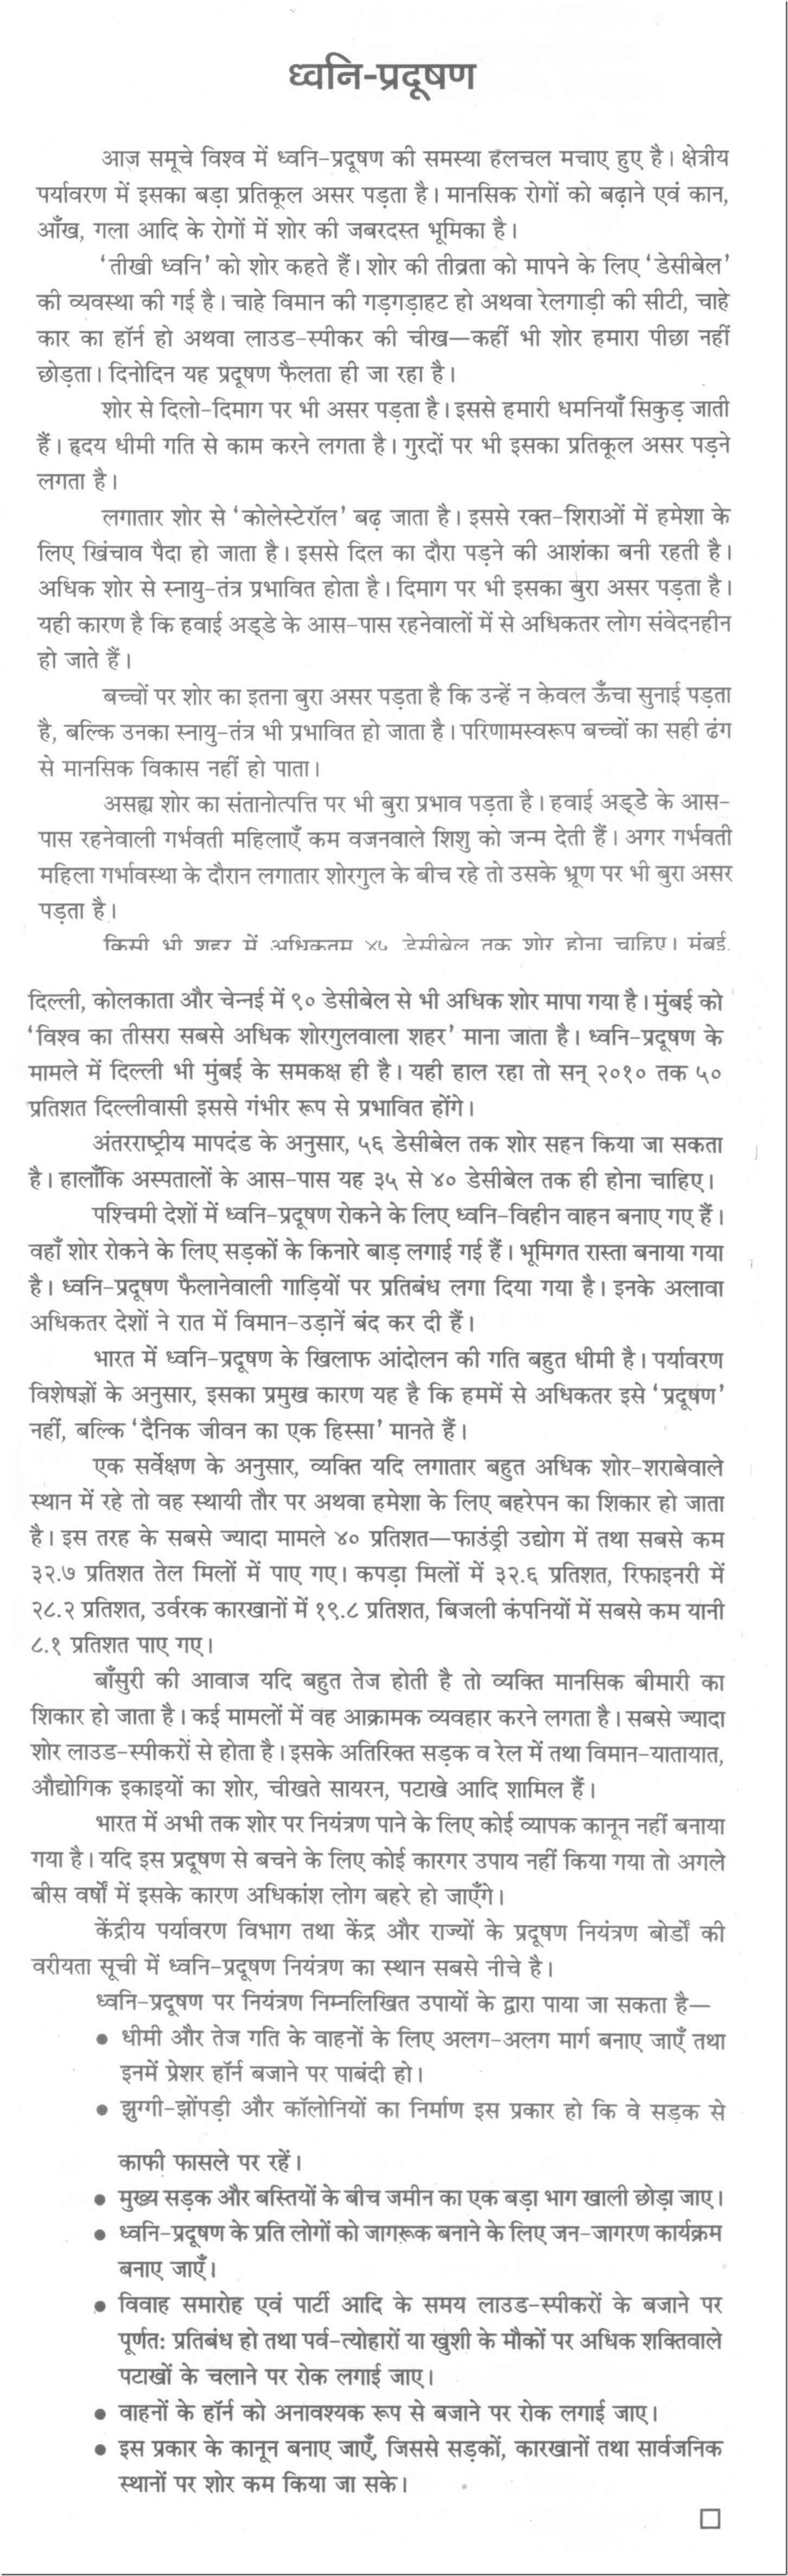 Importance of nature essay in hindi language